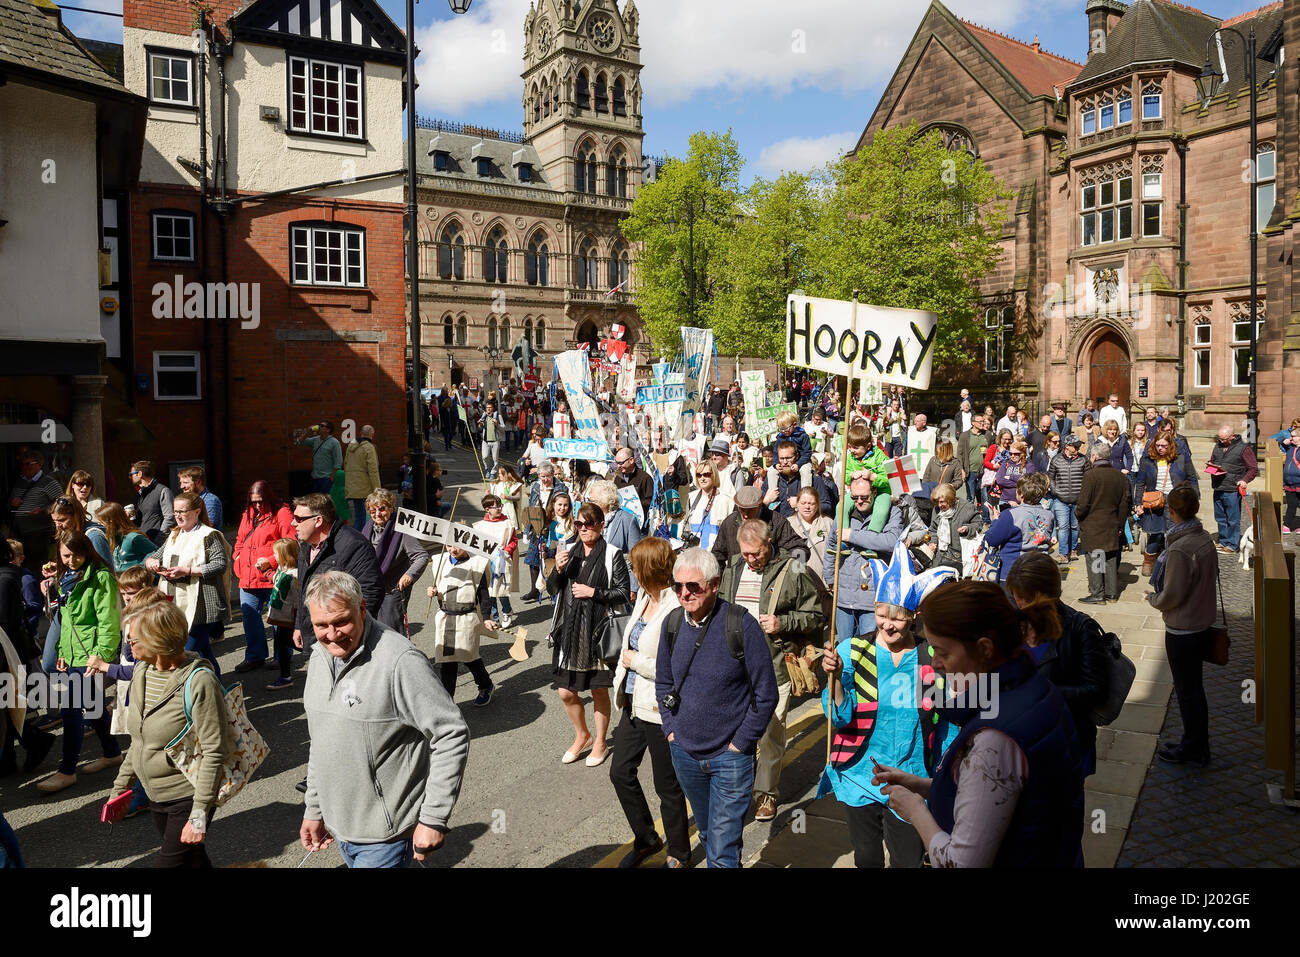 Chester, UK. 23rd April 2017. The St George's day parade through the streets of Chester with a medieval street theatre performance. Credit: Andrew Paterson/Alamy Live News Stock Photo